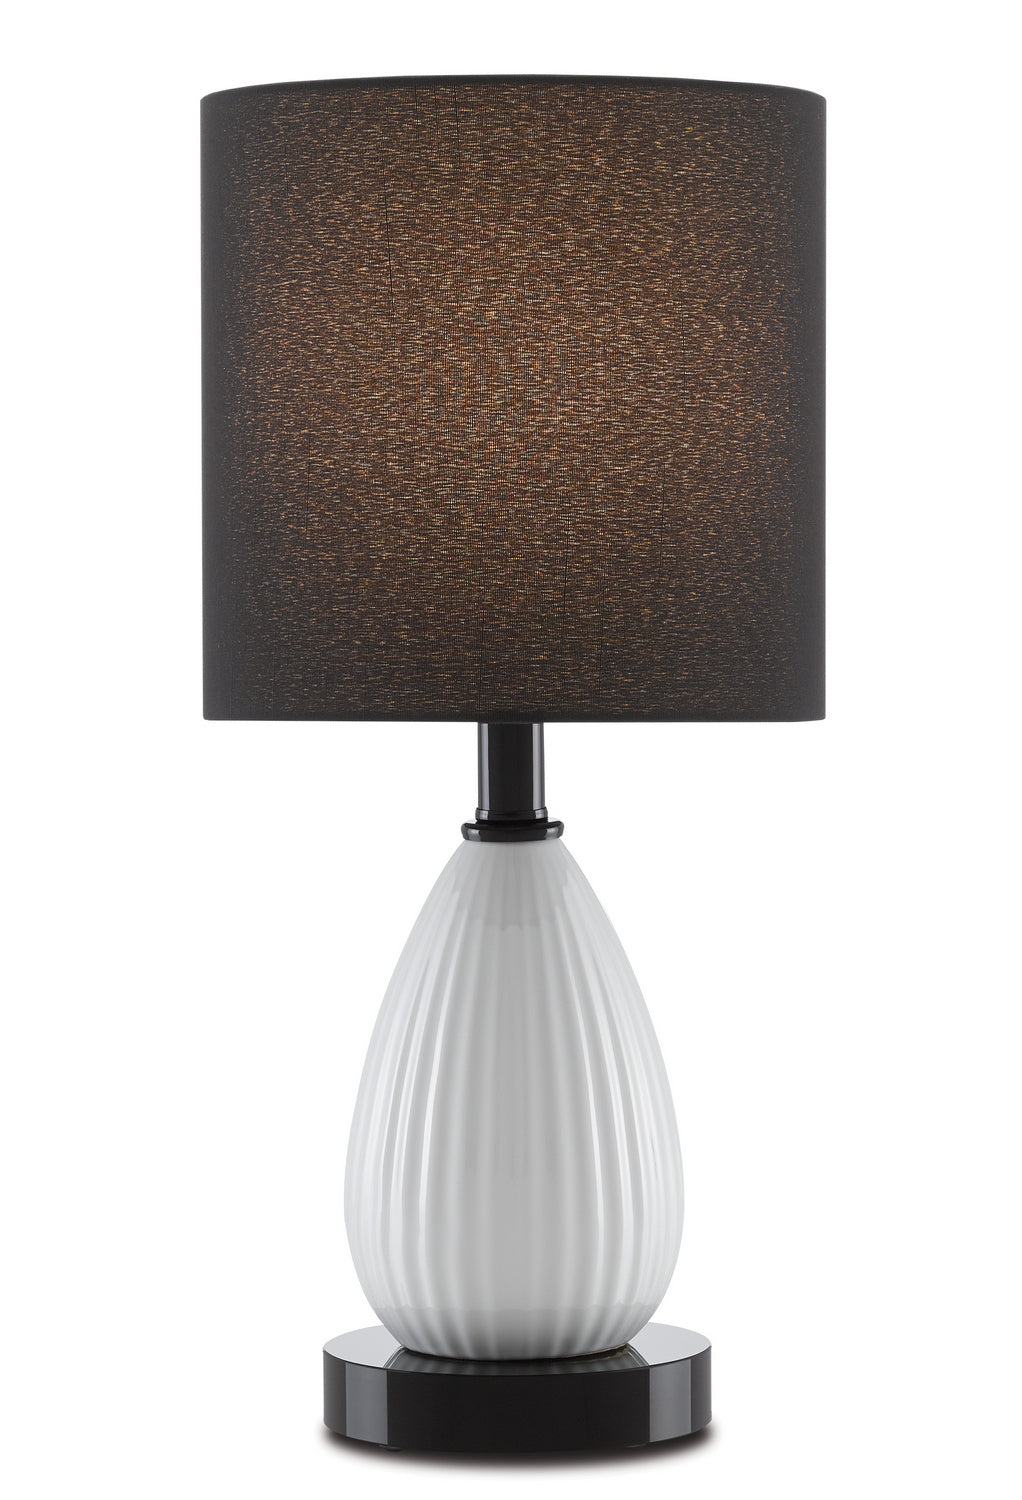 Currey and Company - 6000-0659 - One Light Table Lamp - Coraline